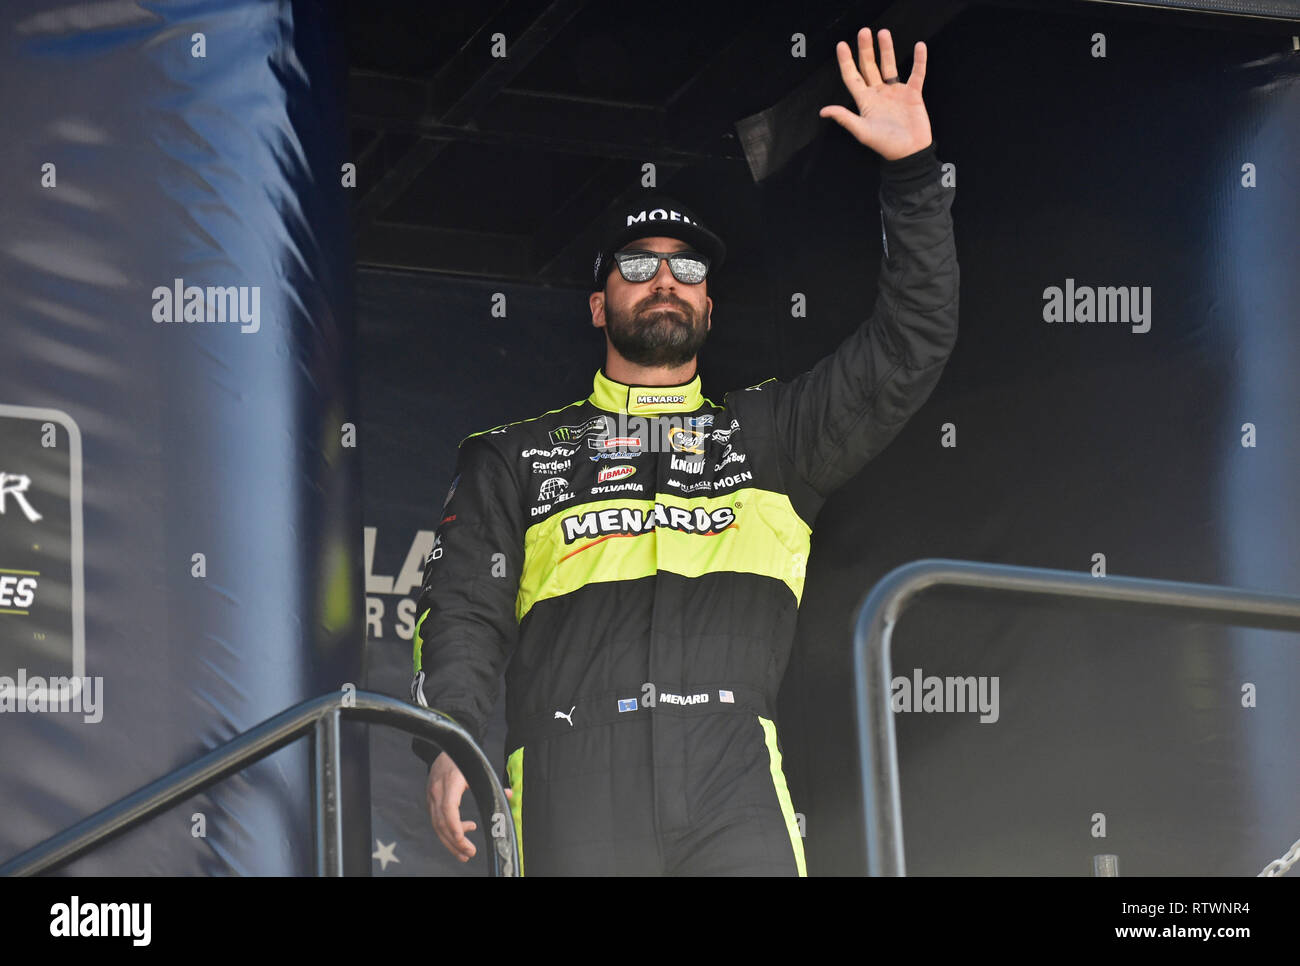 Hampton, GA, USA. 24th Feb, 2018. Menards Ford driver Paul Menard waves to the crowd during driver introductions before the start of the QuikTrip Folds of Honor 500 on Sunday at Atlanta Motor Speedway in Hampton, GA. Austin McAfee/CSM/Alamy Live News Stock Photo